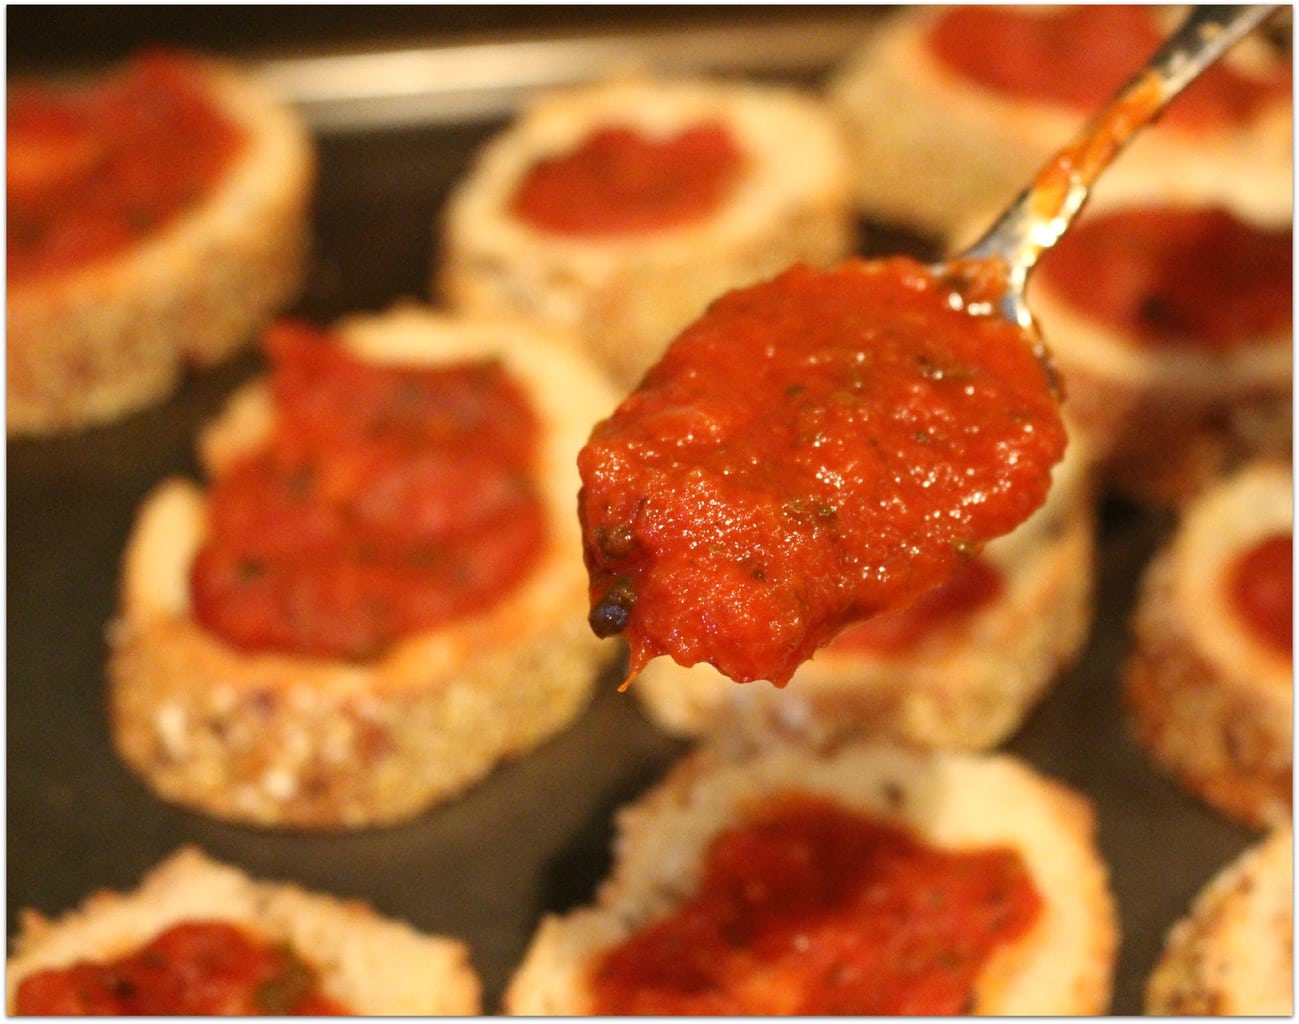 Spoon of marinara sauce with bread and sauce in background.